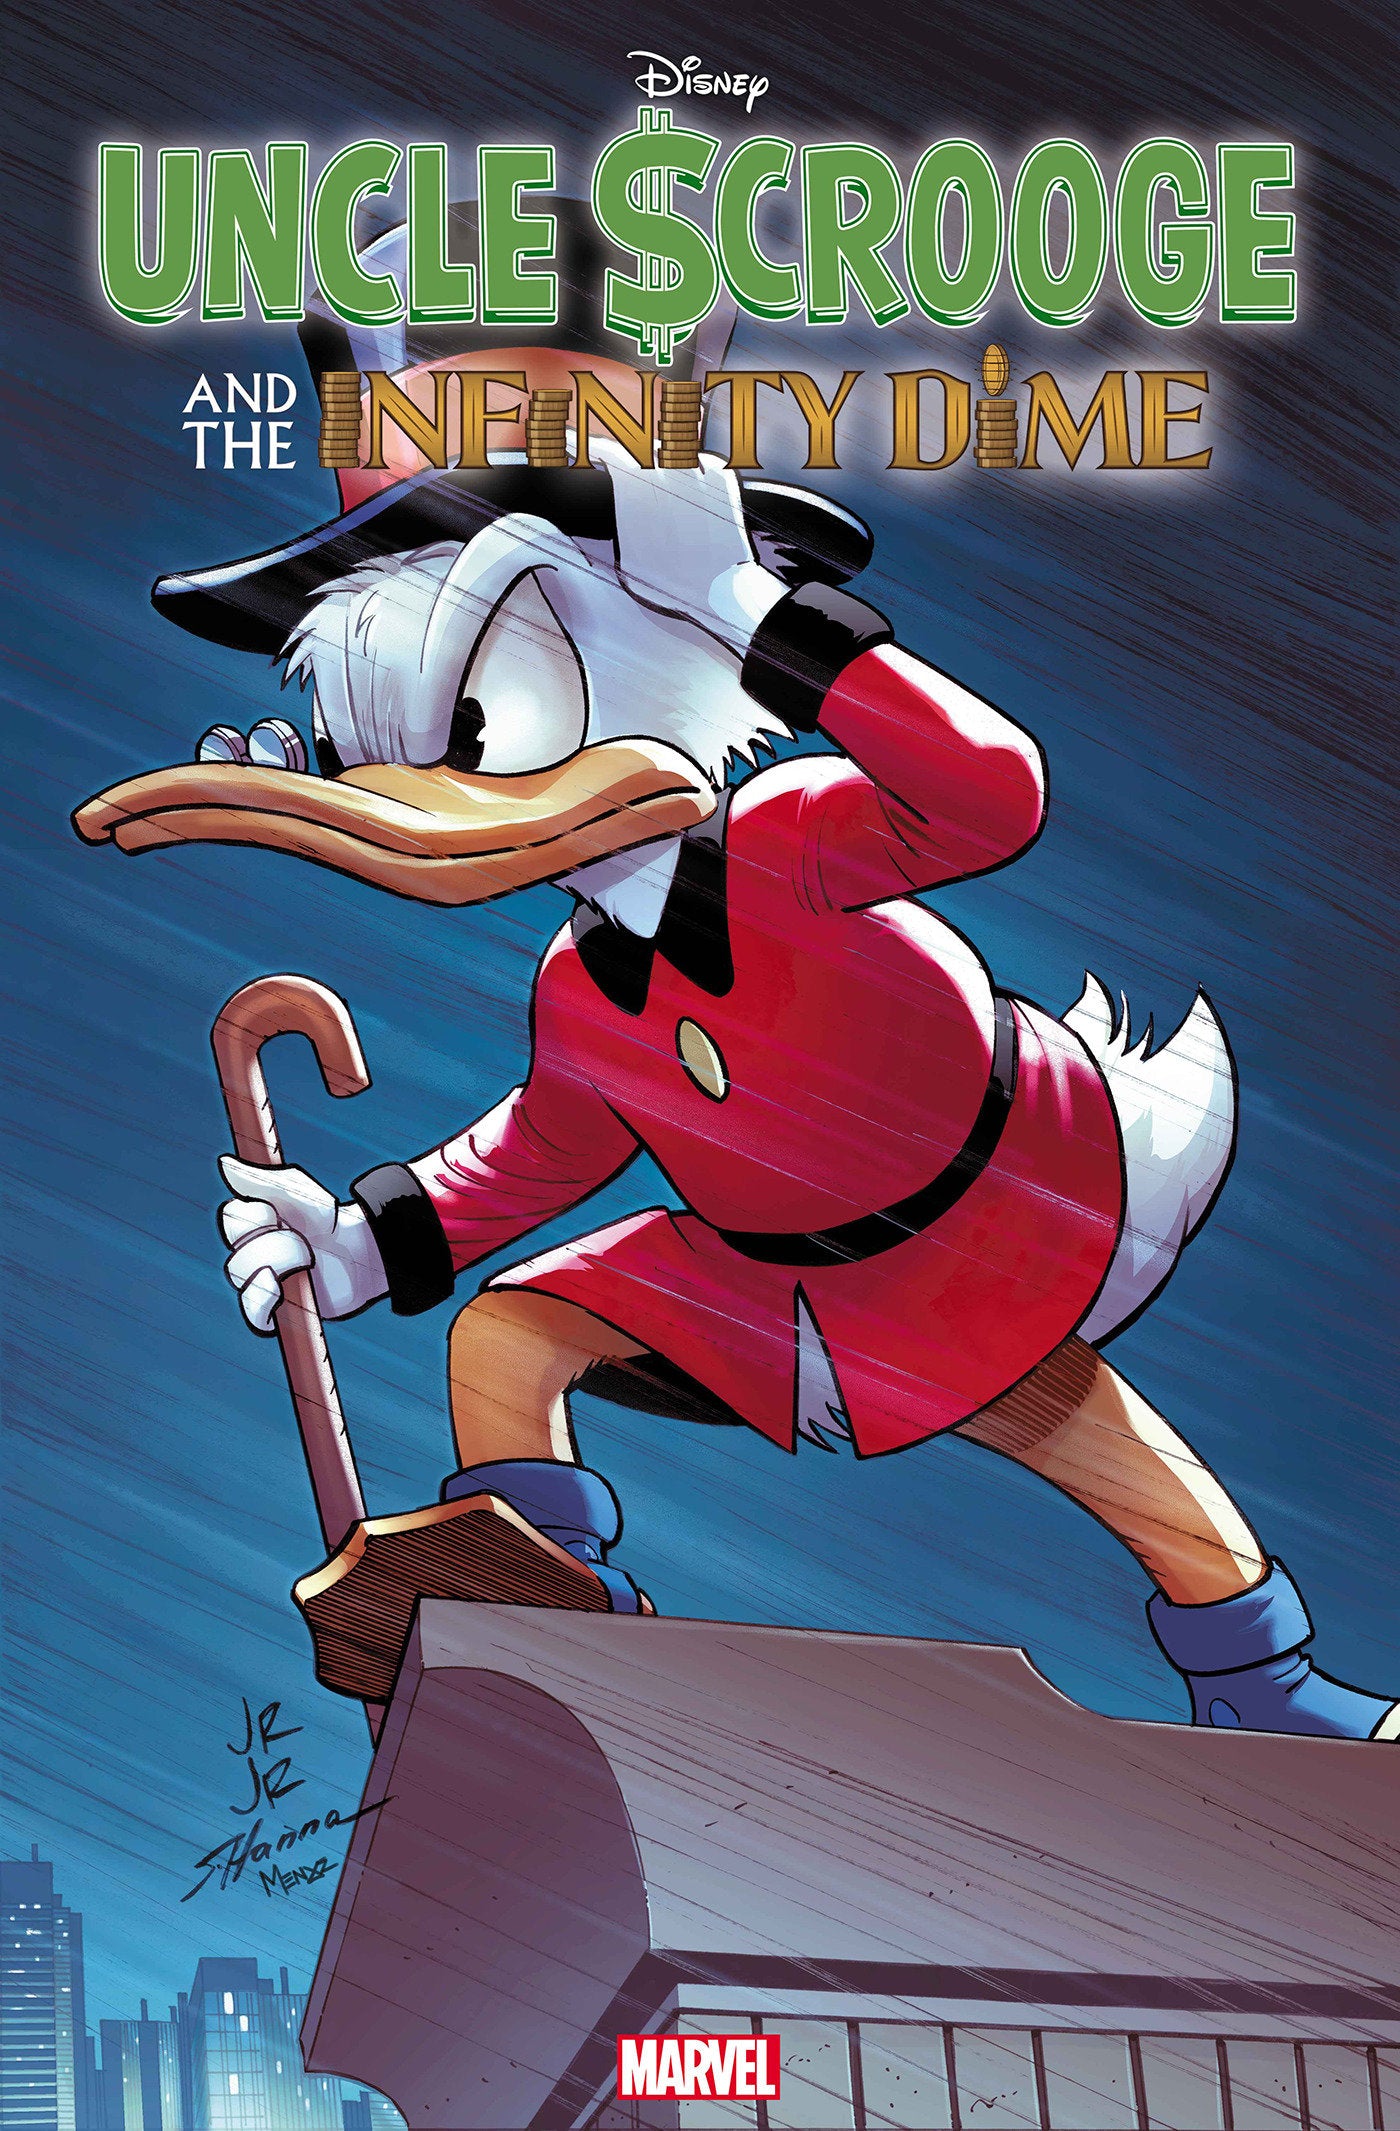 UNCLE SCROOGE AND THE INFINITY DIME #1 JOHN ROMITA JR. VARIANT